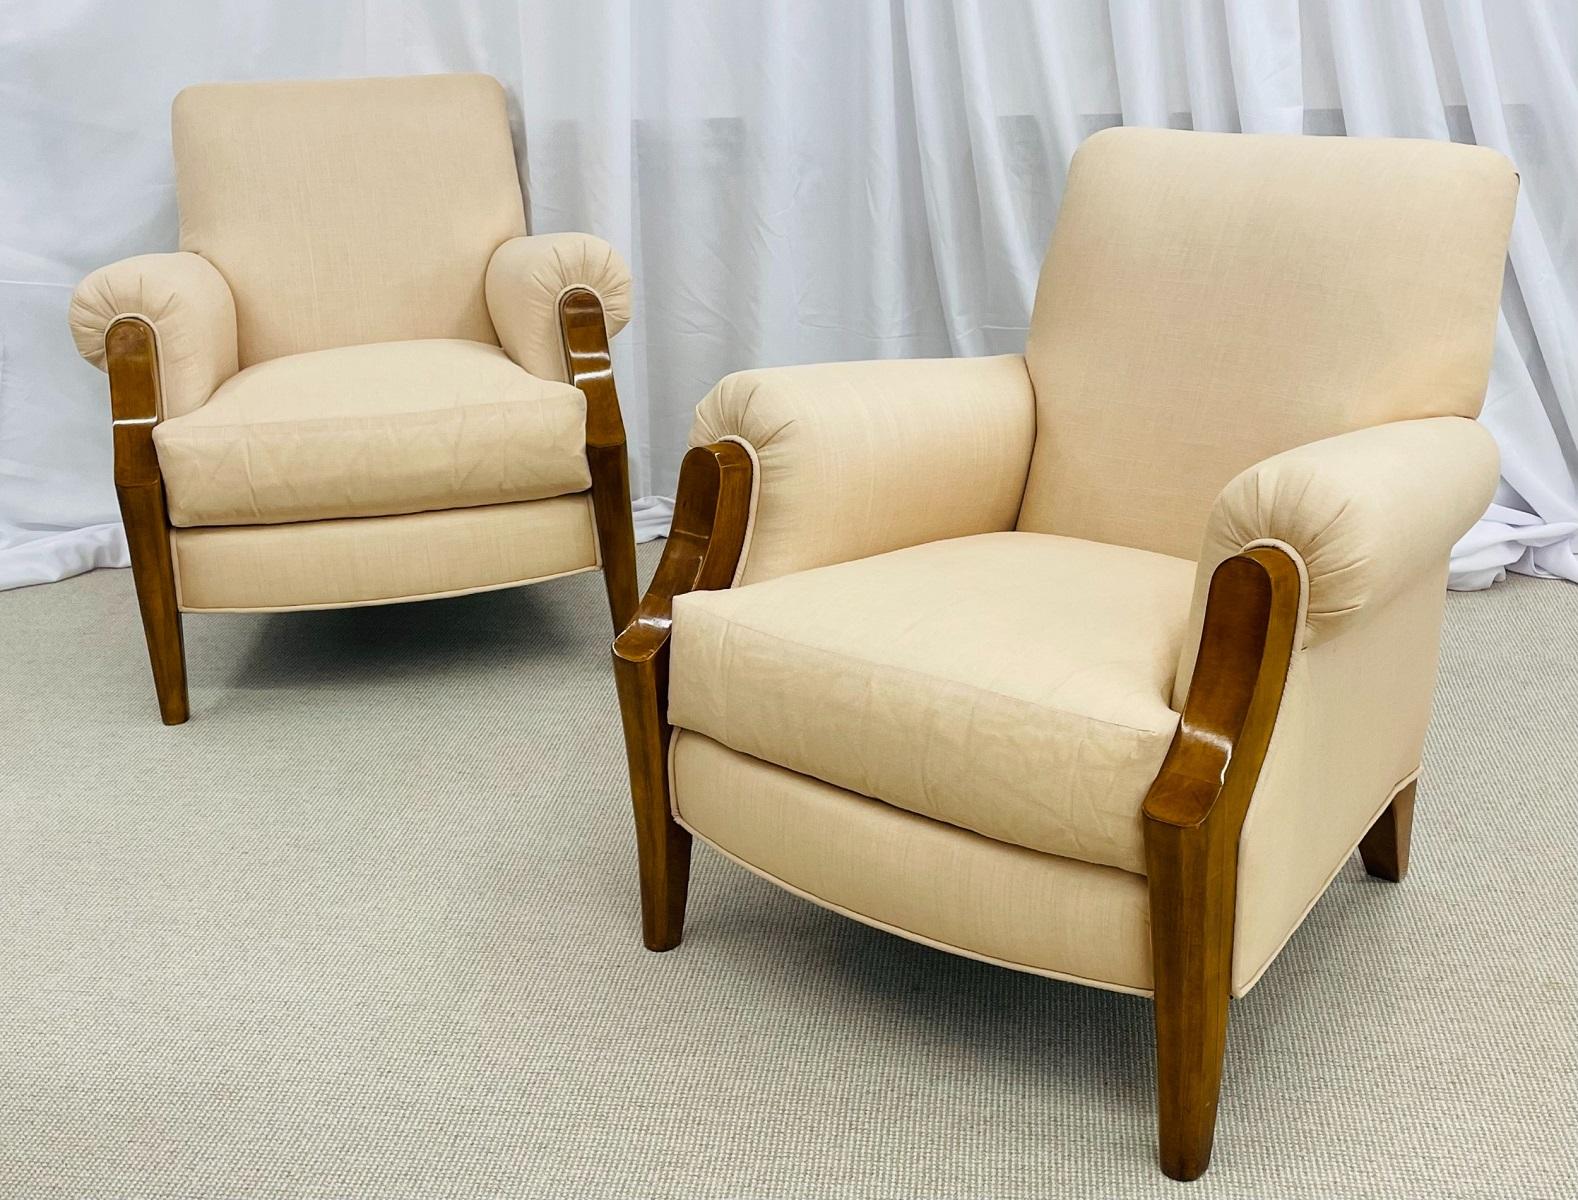 Pair of Dakota Jackson Style arm/lounge chairs, America, 1980s
This pair of sturdy wide arm chairs are sleek and stylish and are certain to add glamour to any setting in the home or office.
Newly upholstered in a neutral beige colored linen